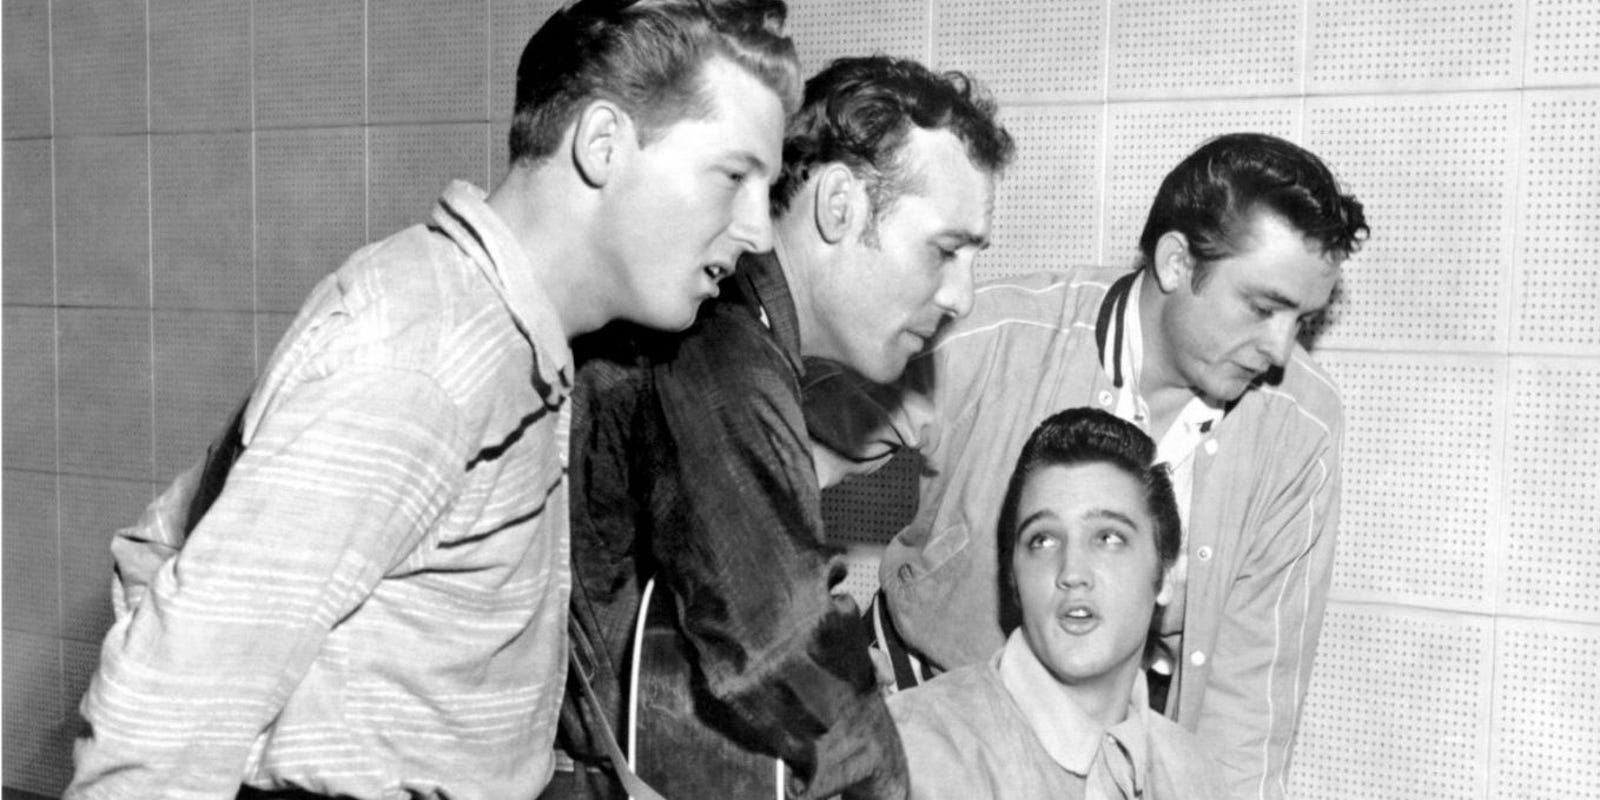 Elvis, Johnny Cash, and others singing